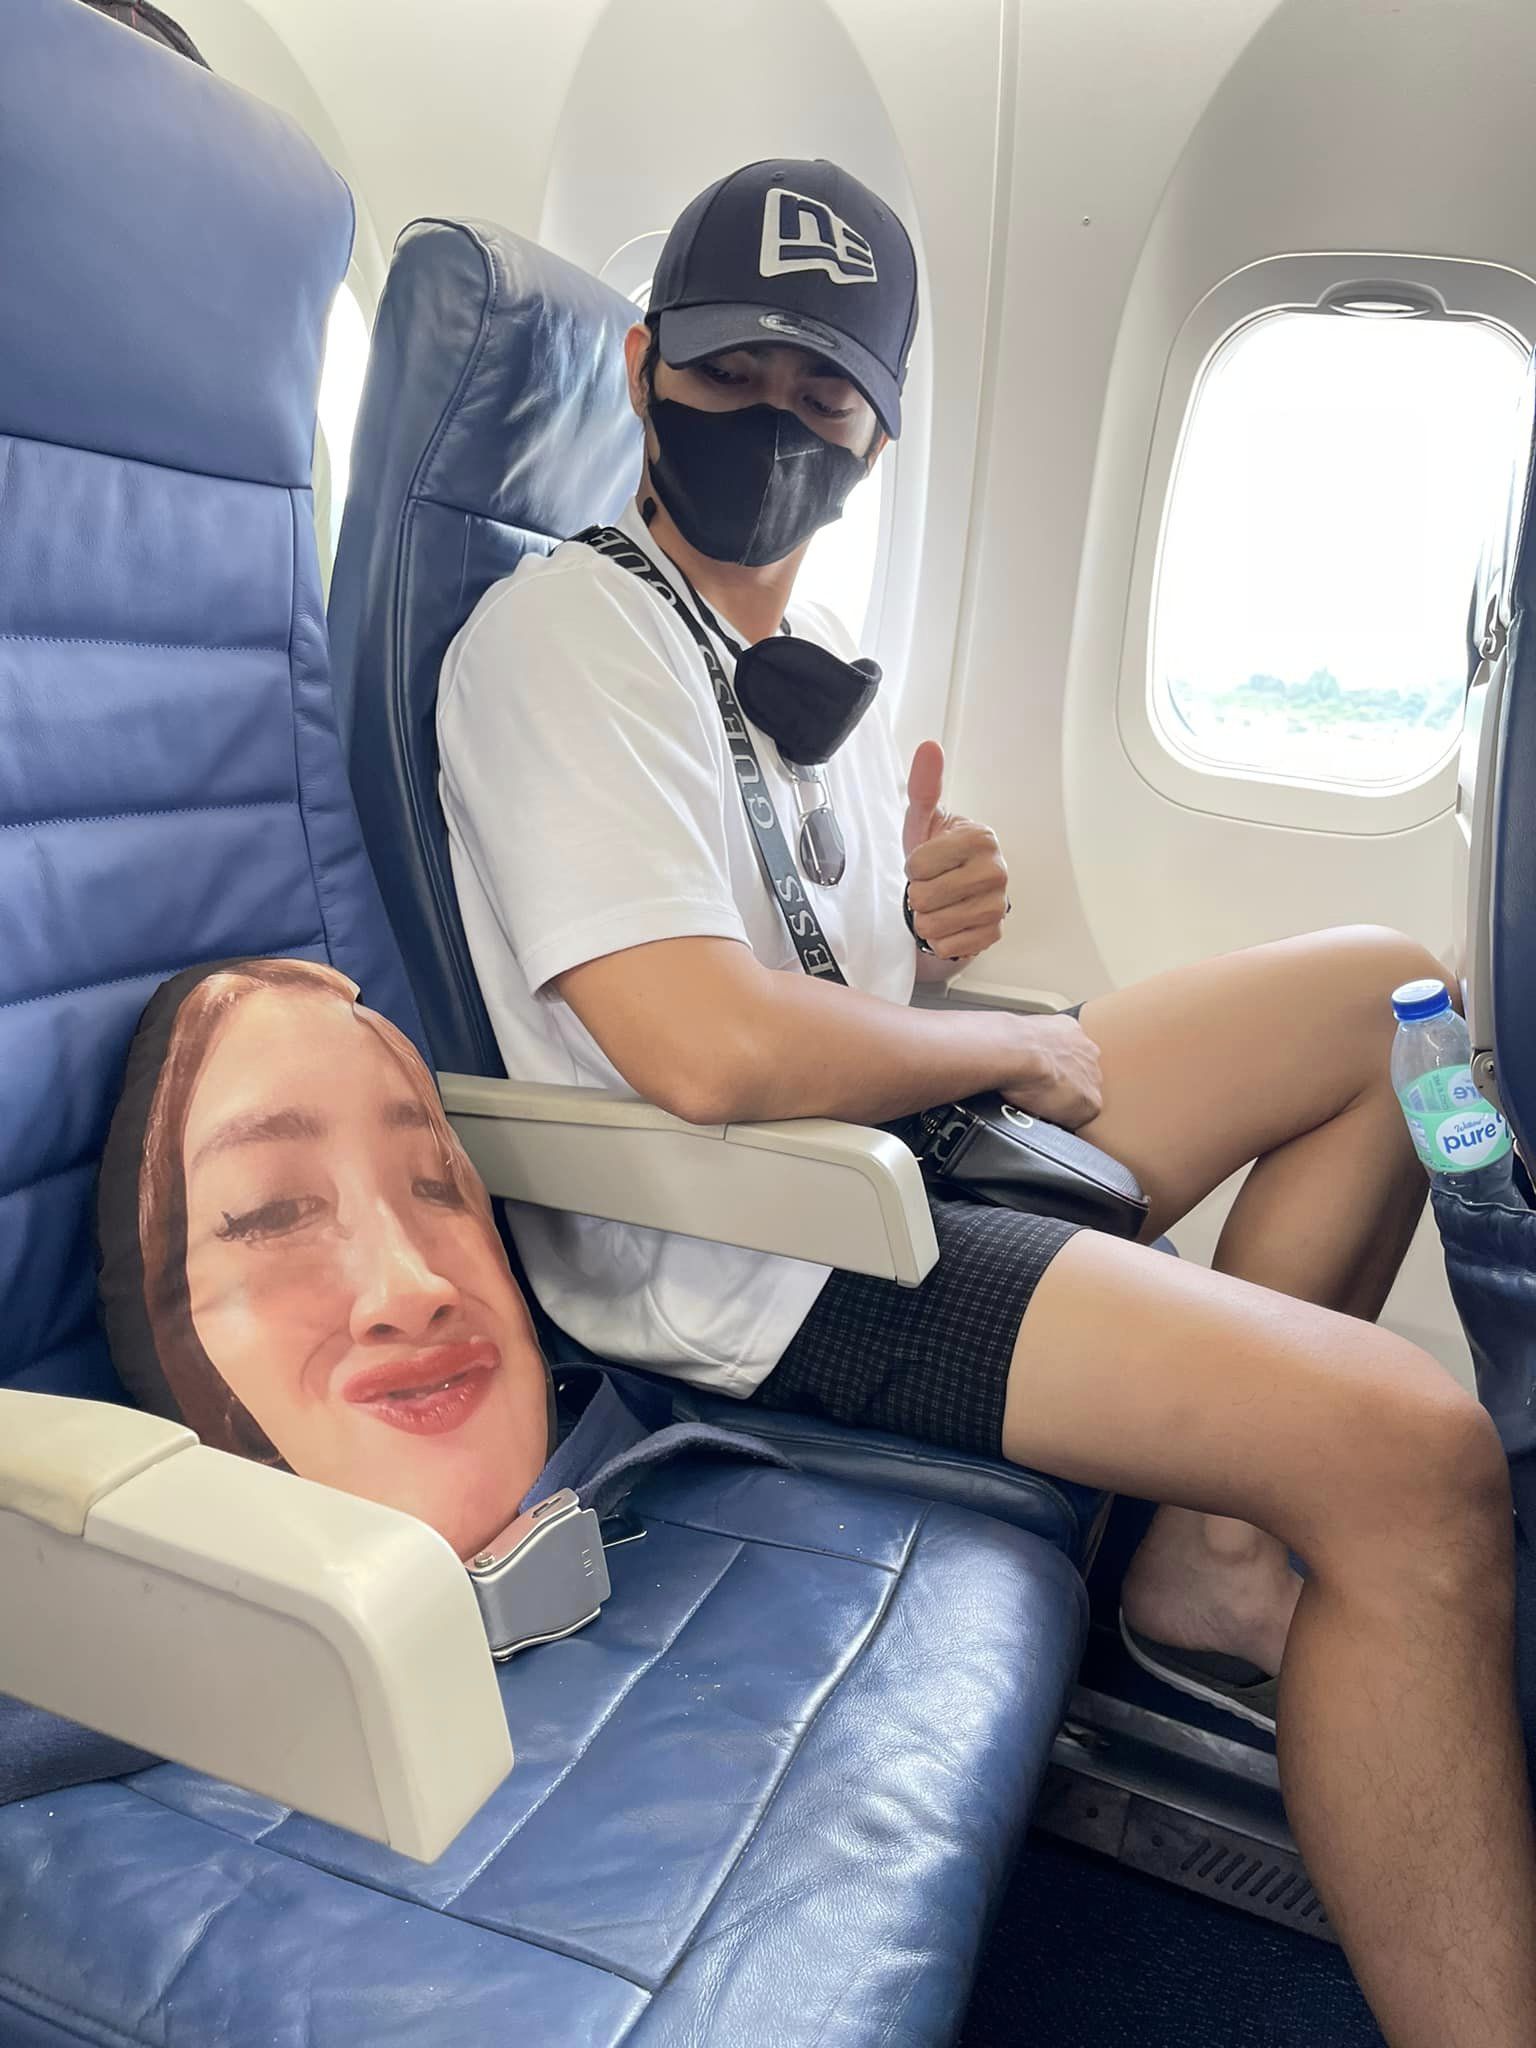 Man goes on vacation with wife’s face pillow, since she can't join 1